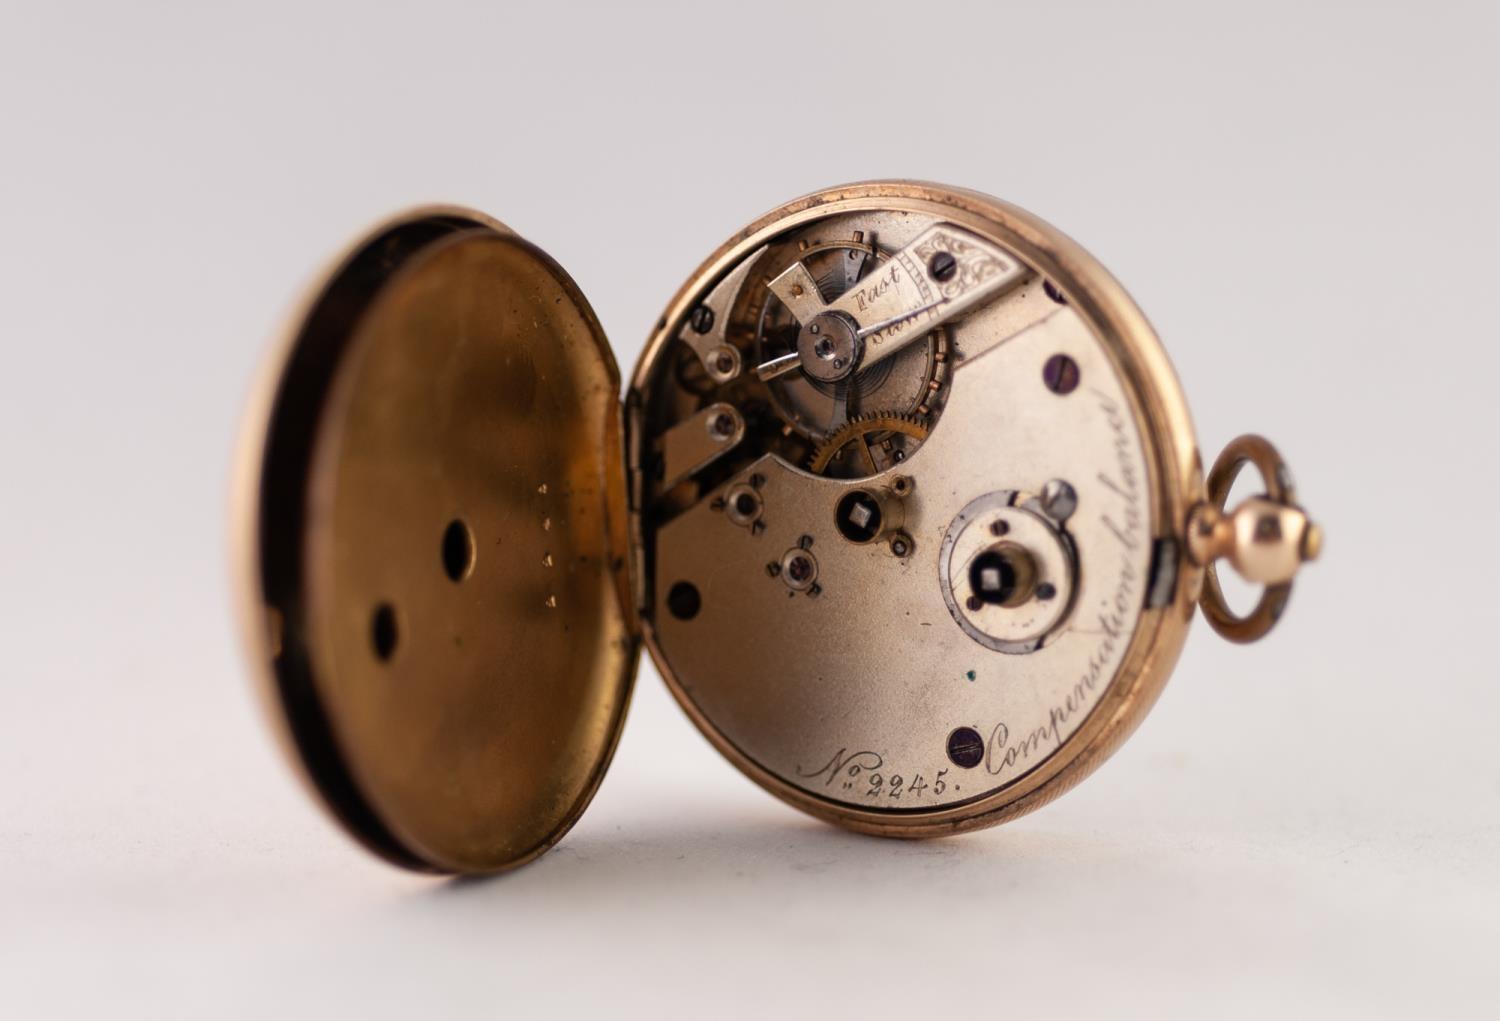 EARLY 20TH CENTURY 14ct GOLD OPEN FACED KEYWIND POCKET WATCH, the 15 jewels patent lever movement - Image 2 of 2